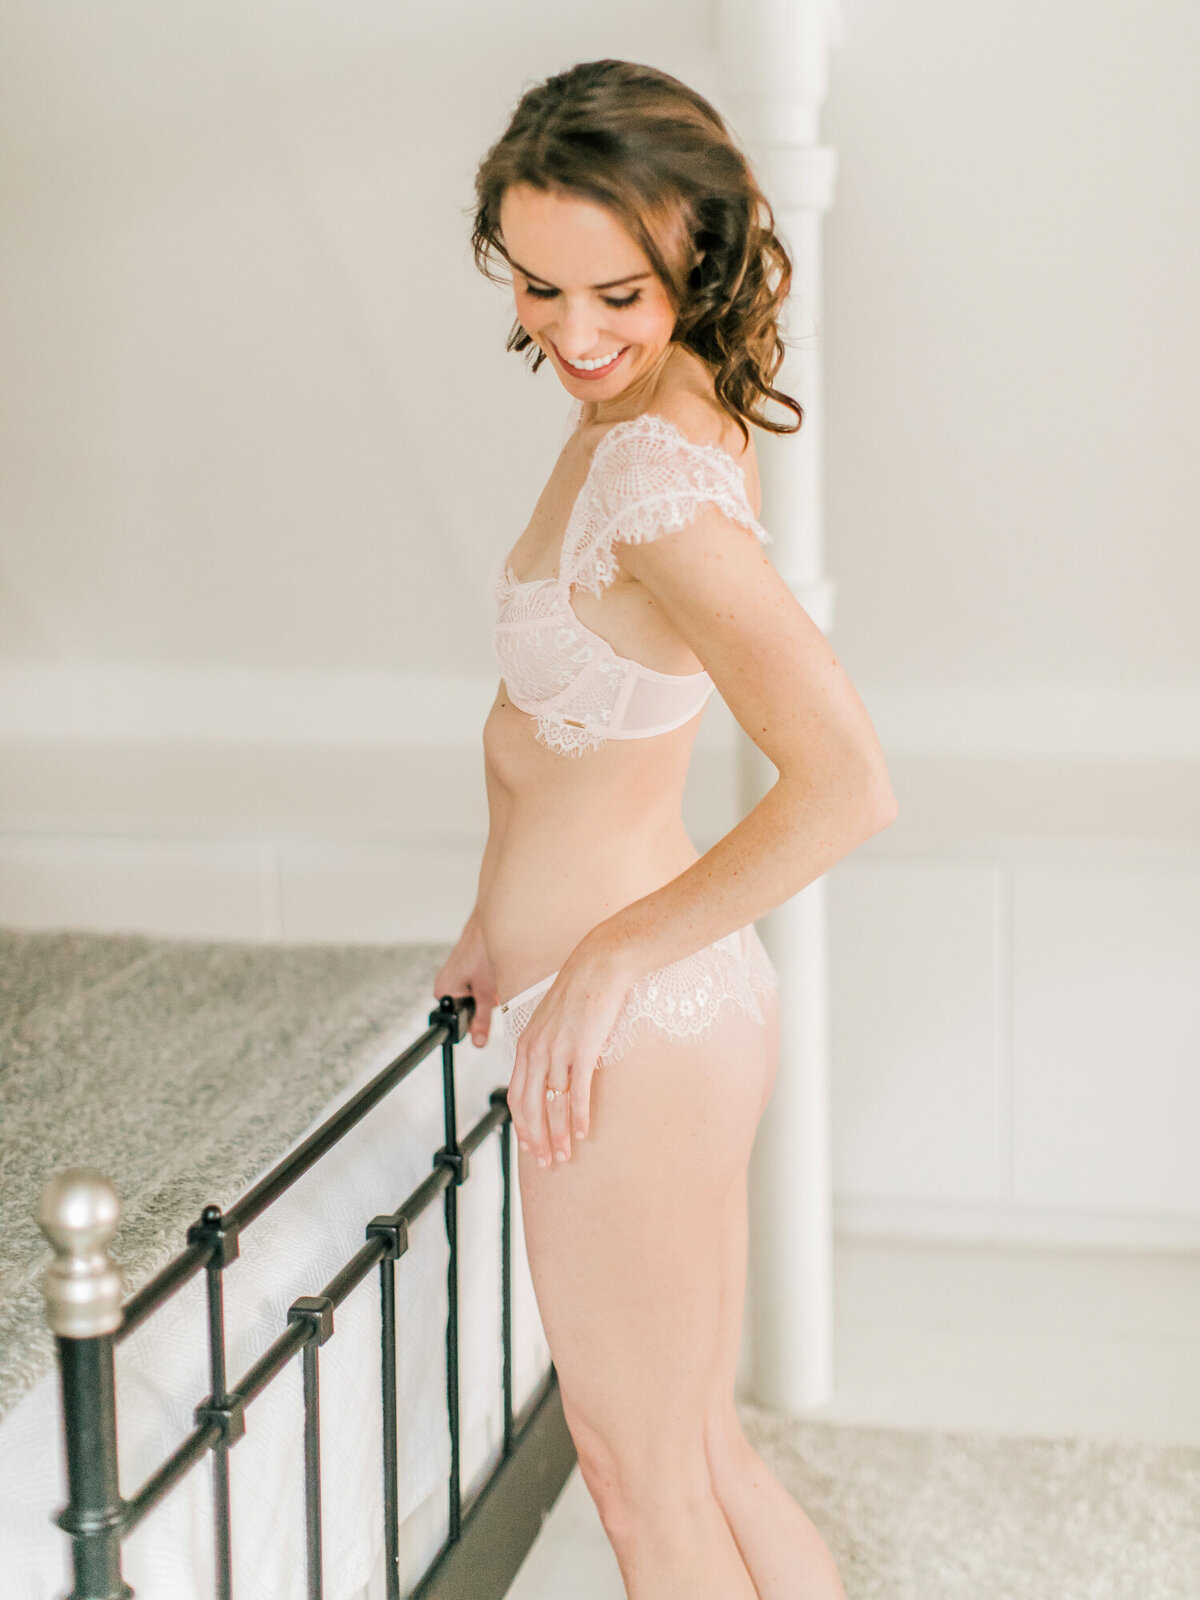 A happy candid moment during a boudoir session in Chicago